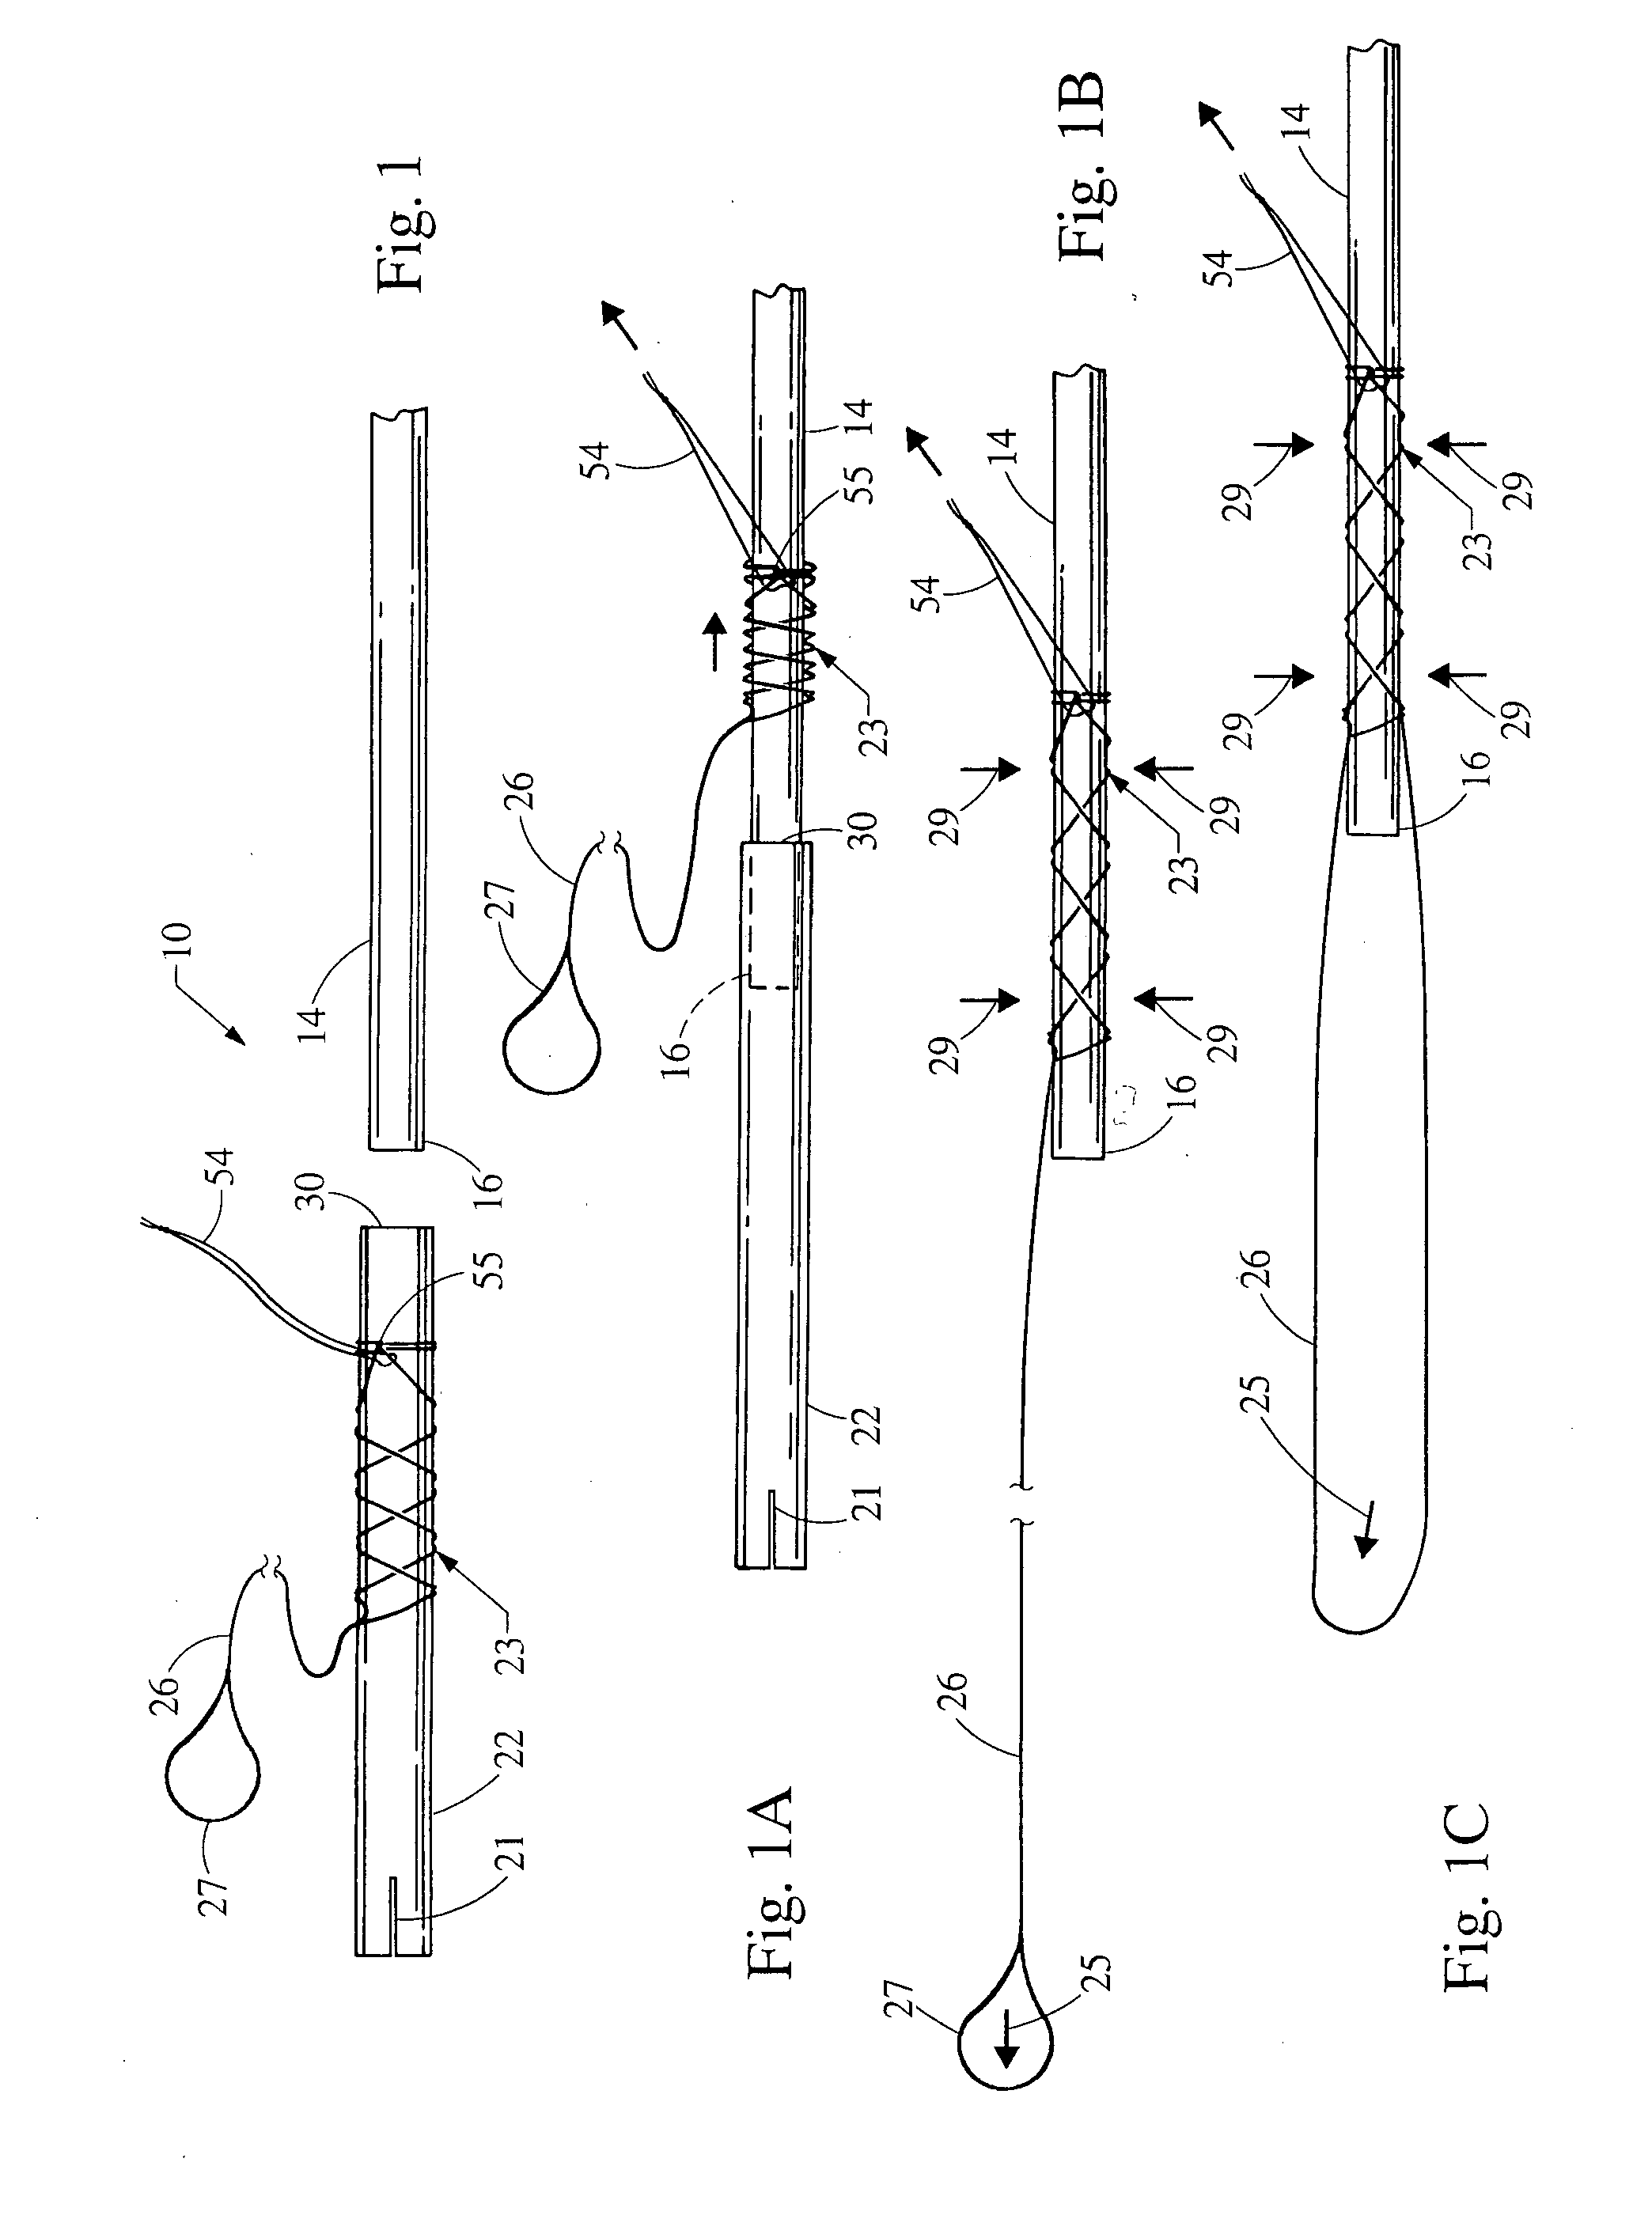 Device for removing an elongated structure implanted in biological tissue